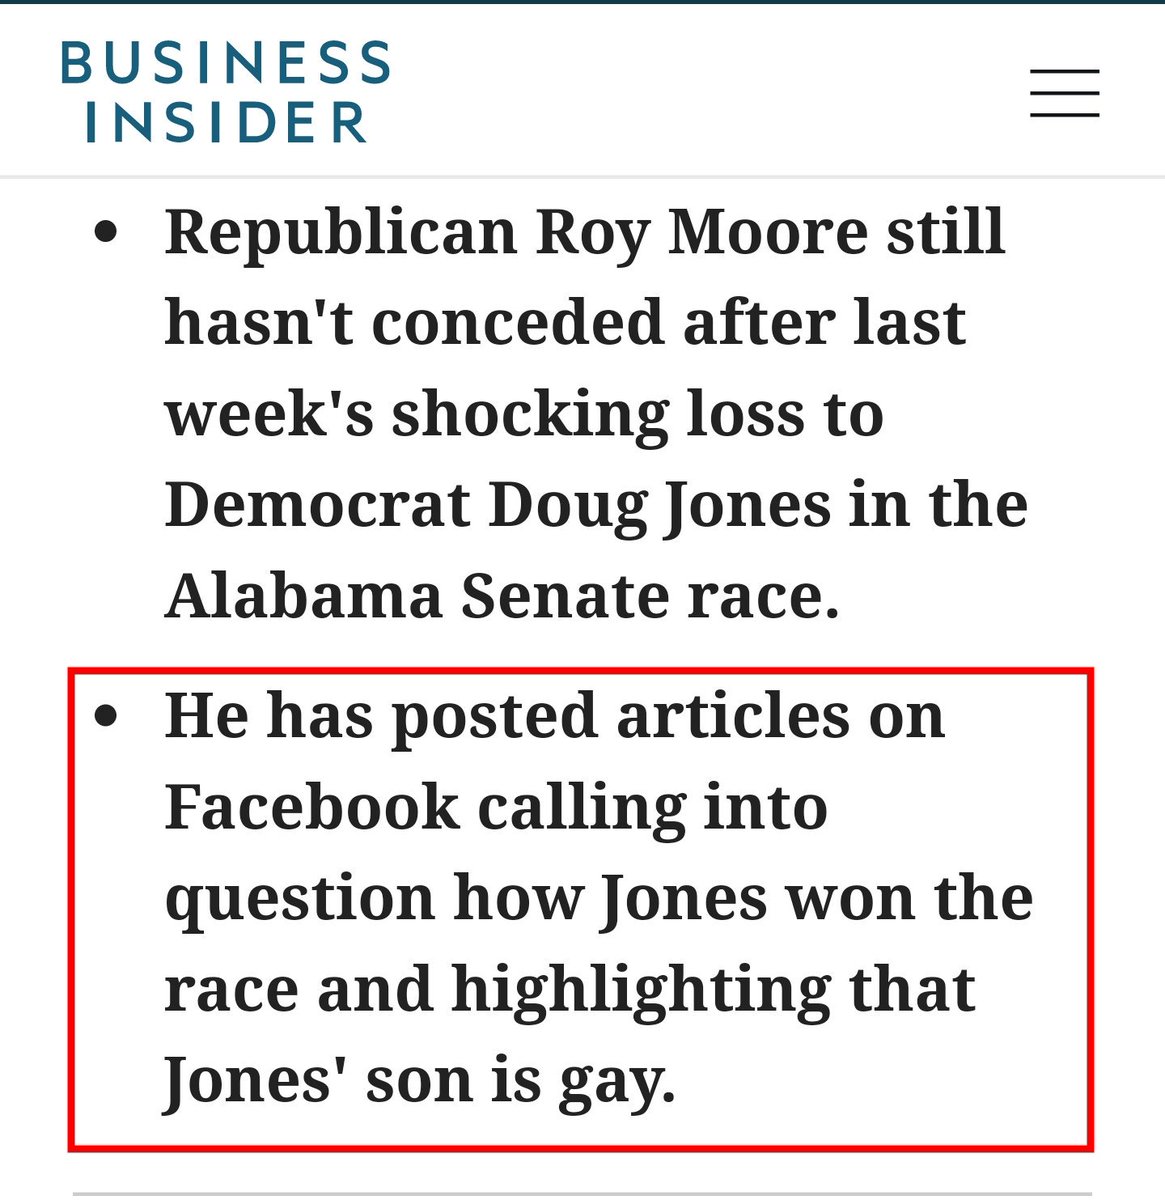 Moore's argument seems to be 'But how could he win? His son has teh gay!!!!! Must be voter fraud! Quick send money for investigation!' 2 #VoterFraud #VoterSuppression #ALSen #Alabamasenateelection #homophobia #NoHate #LGBTQrights